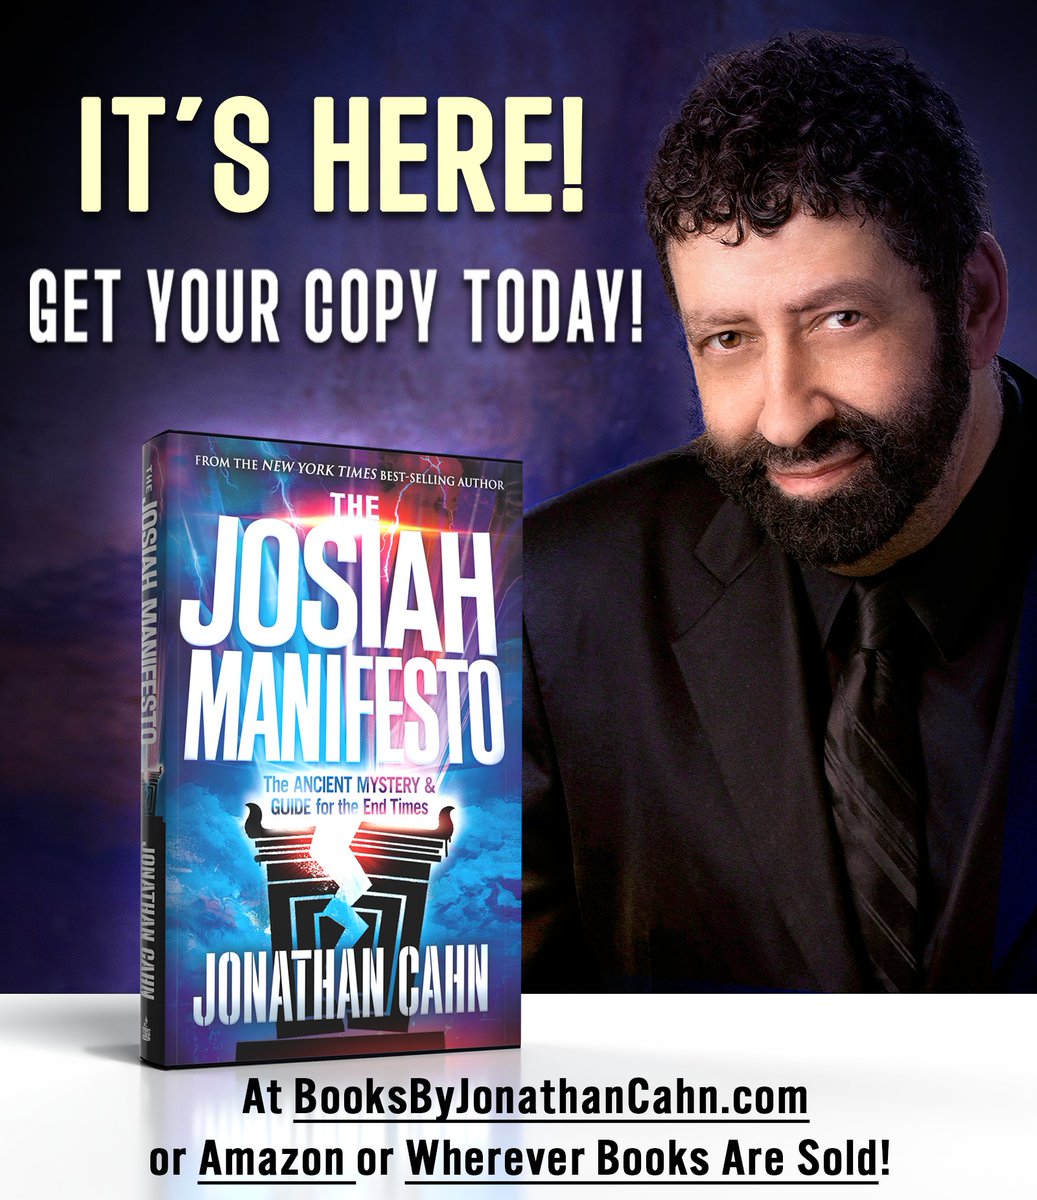 IT'S Here

📷 Get your copy today at BooksByJonathanCahn.com

'The Josiah Manifesto' is the guide to the stunning mysteries behind the
dramatic events of recent times & with what lies ahead.

#JonathanCahn #JonathanCahnBooks #Prophetic #Mysteries #EndTimes
#TheJosiahManifesto